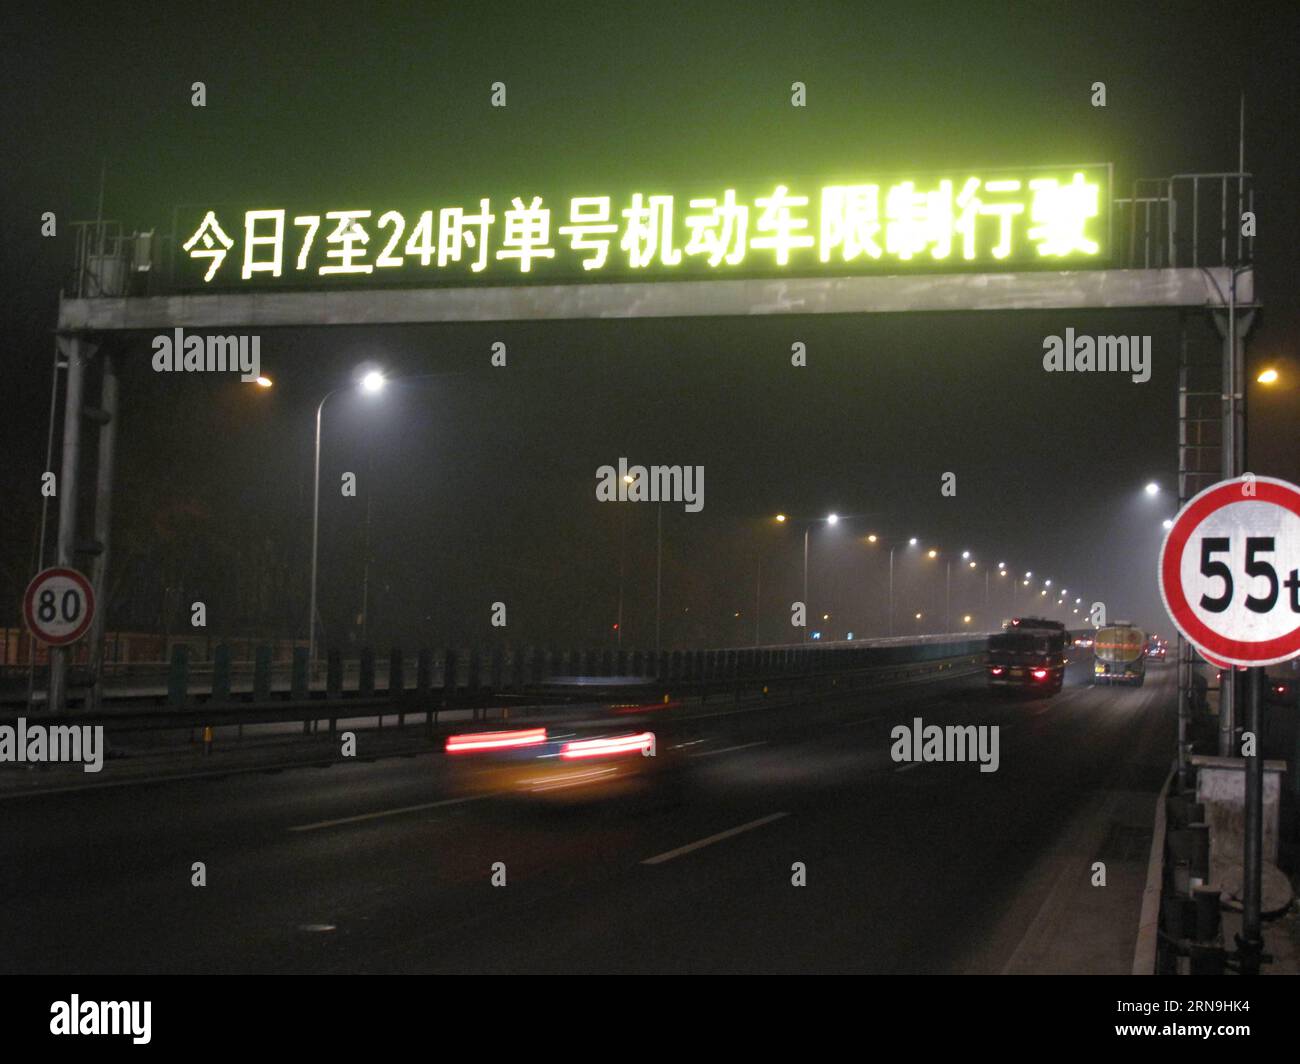 (151208) -- BEIJING, Dec. 8, 2015 -- An electronic road sign reminds drivers to use cars on alternating days depending on the odd or even numbers of their license plates in Beijing, capital of China, Dec. 8, 2015. Beijing has issued its first red alert for air pollution under a four-tier emergency response system created in October 2013. The red alert, the most serious level, will last from 7 a.m. on Tuesday to noon on Thursday. Under a red alert, the city s emergency management headquarters has advised kindergartens, primary and high schools to suspend classes, banned outdoor operations on co Stock Photo